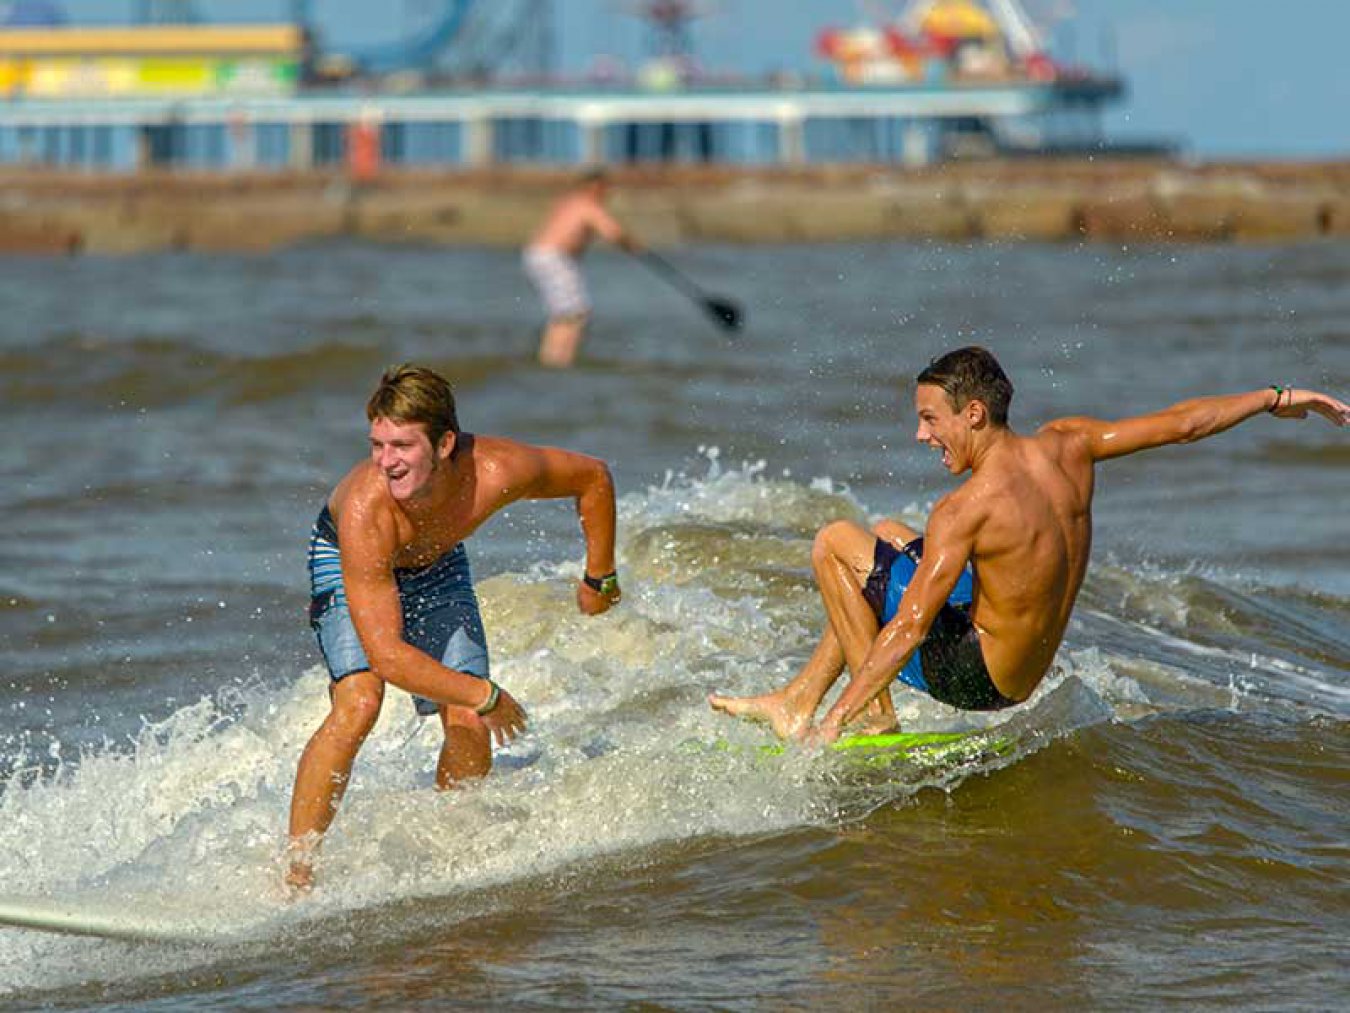 Boys Surfing at the Beach